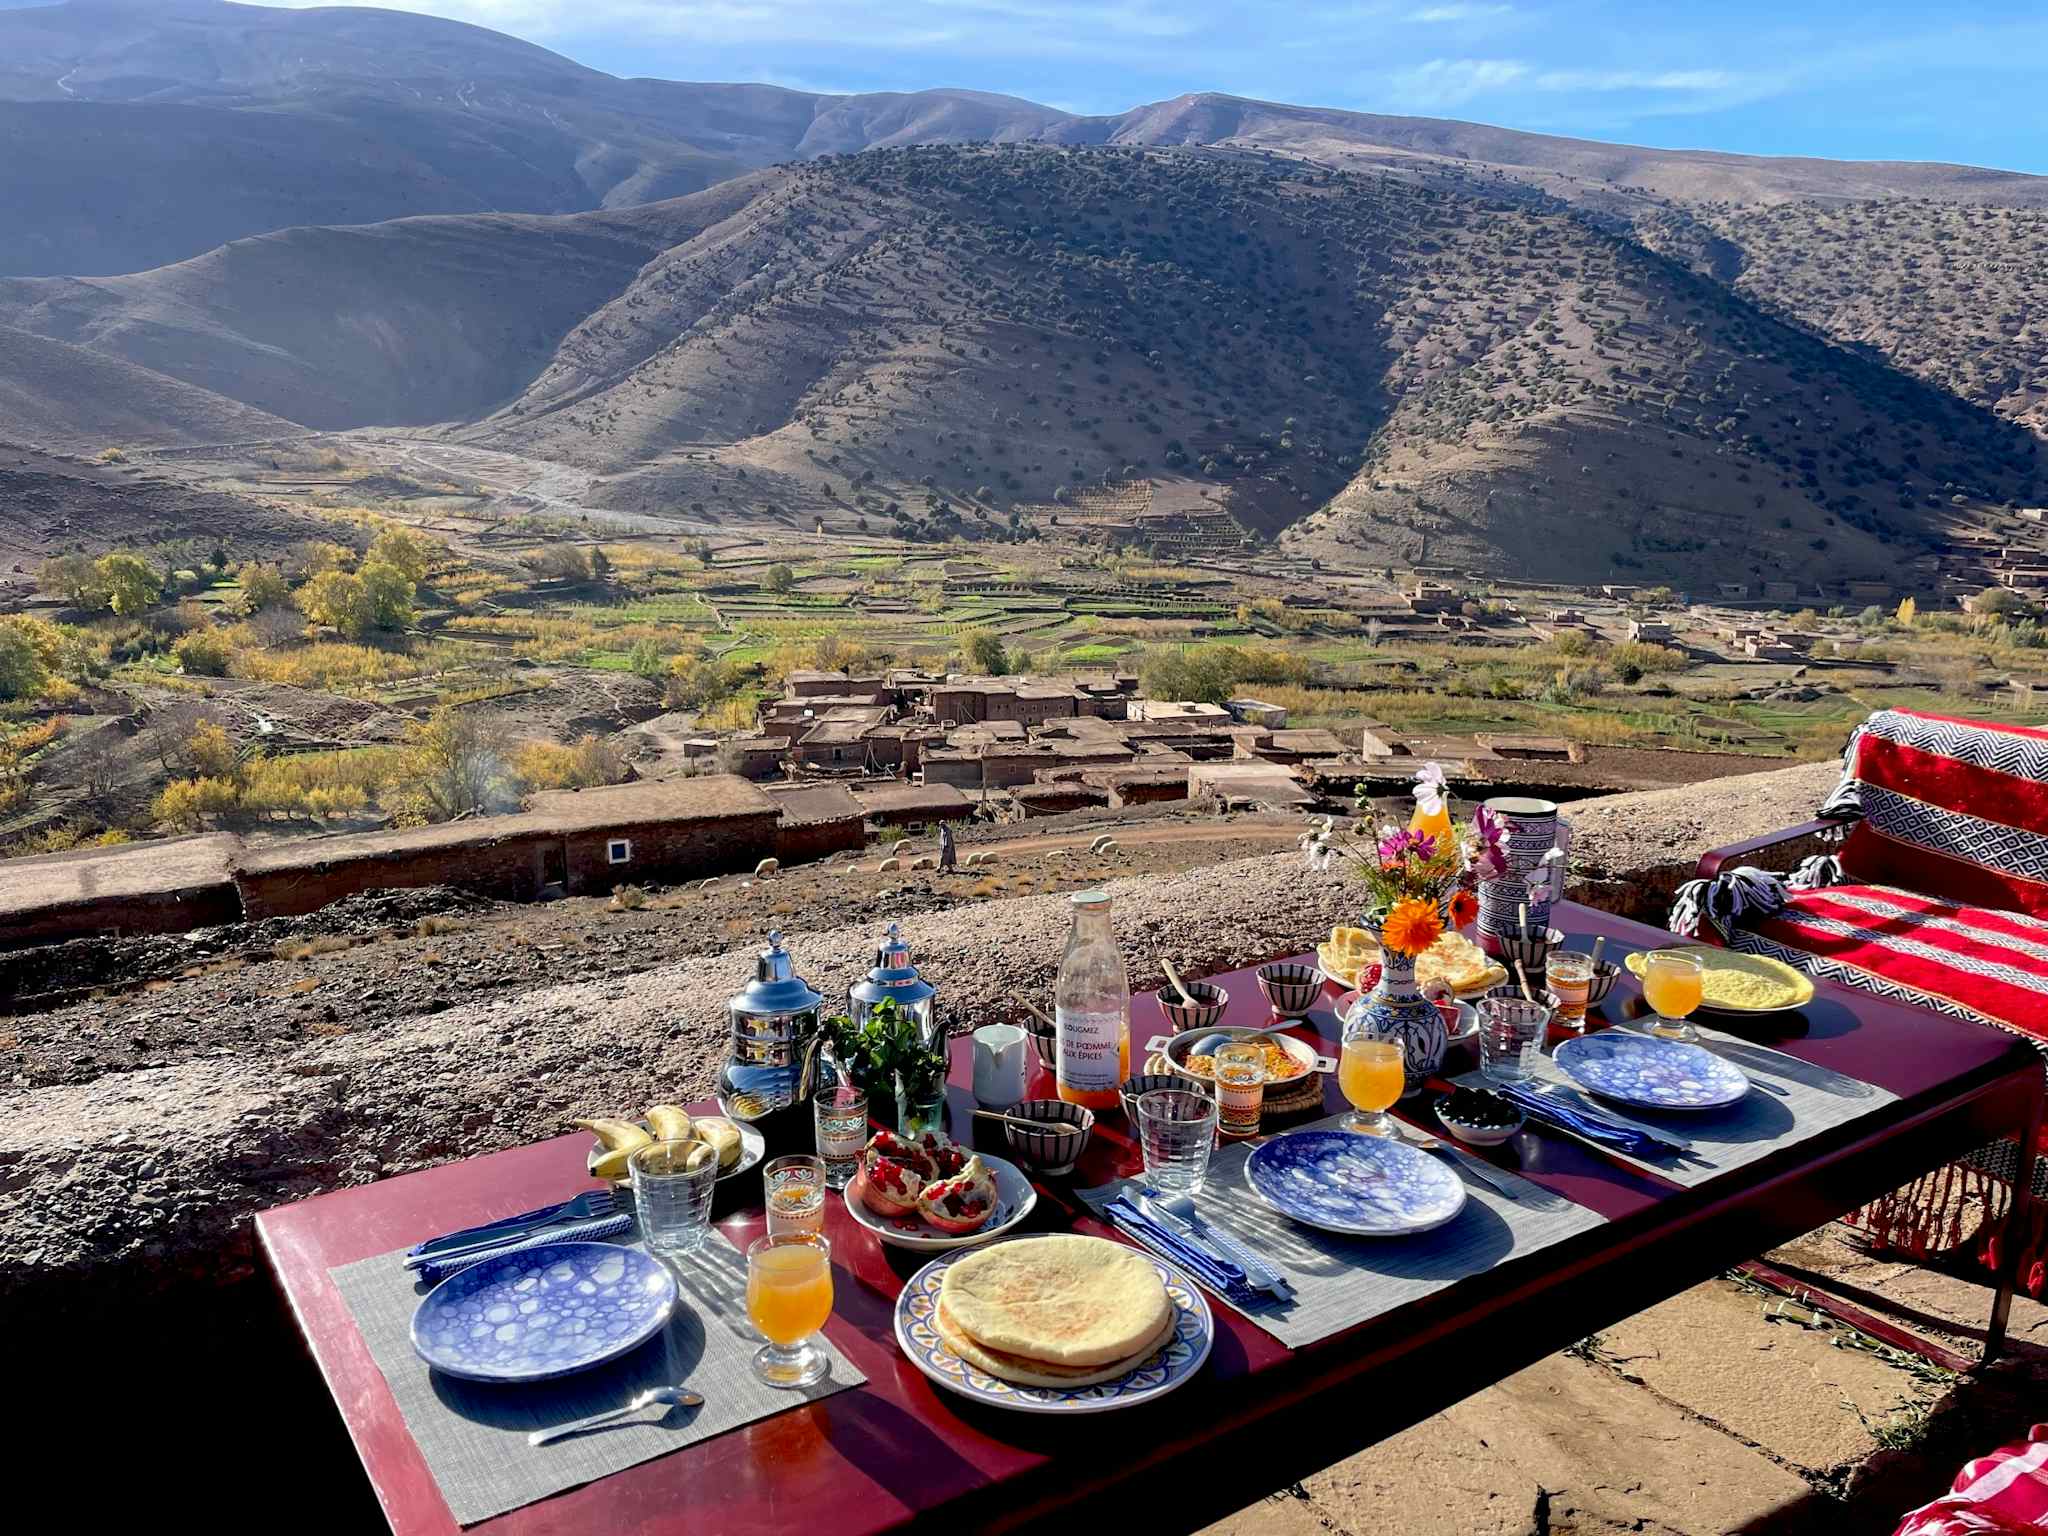 Table laid for lunch with a view of the Atlas Mountains in Morocco